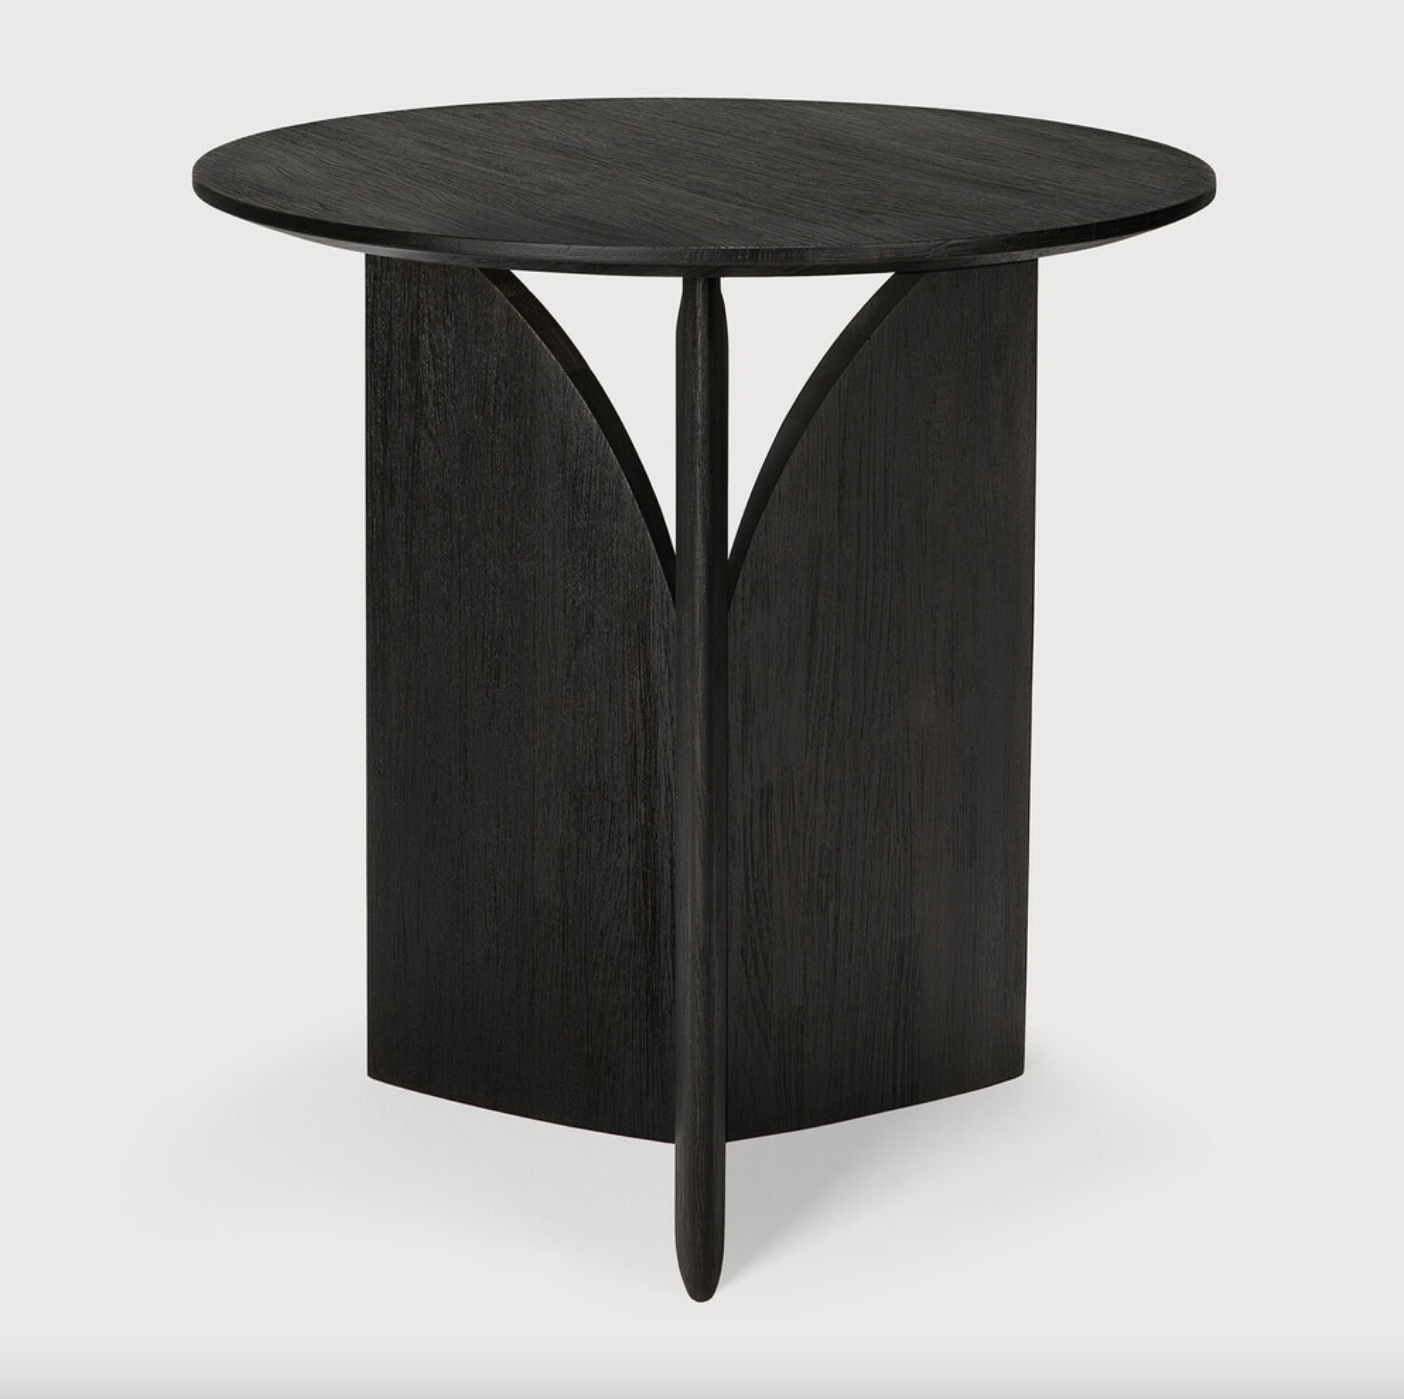 The Teak Fin Side Table is a favorite! It looks like different sculptures from every angle. We love seeing this table as a sculptural accent to your living space or office. It could even make a beautiful nightstand!   Designed by Alain van Havre  Dimensions: 20"w x 20"d x 20"h  Weight: 13 lbs  Material: Teak Finish: Varnished